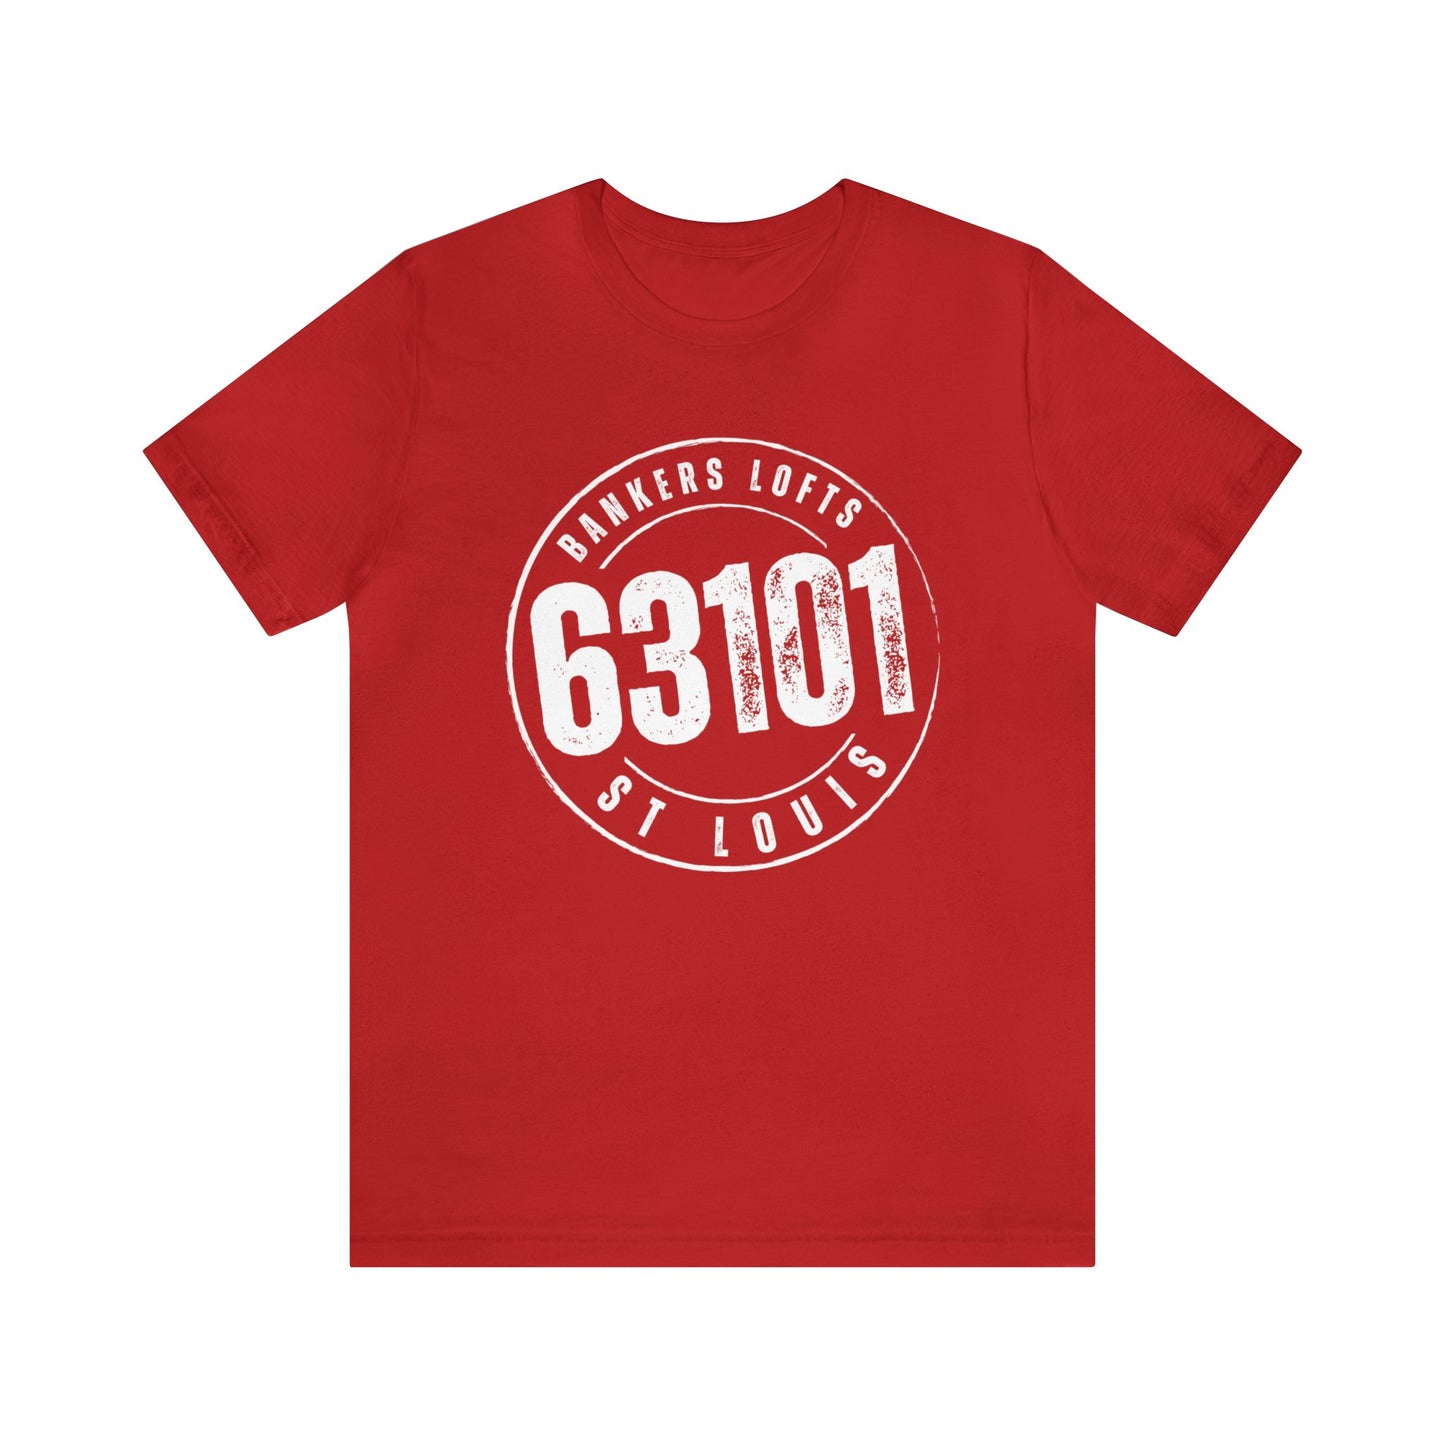 63101 Bankers Lofts St. Louis Tee (White Graphic)